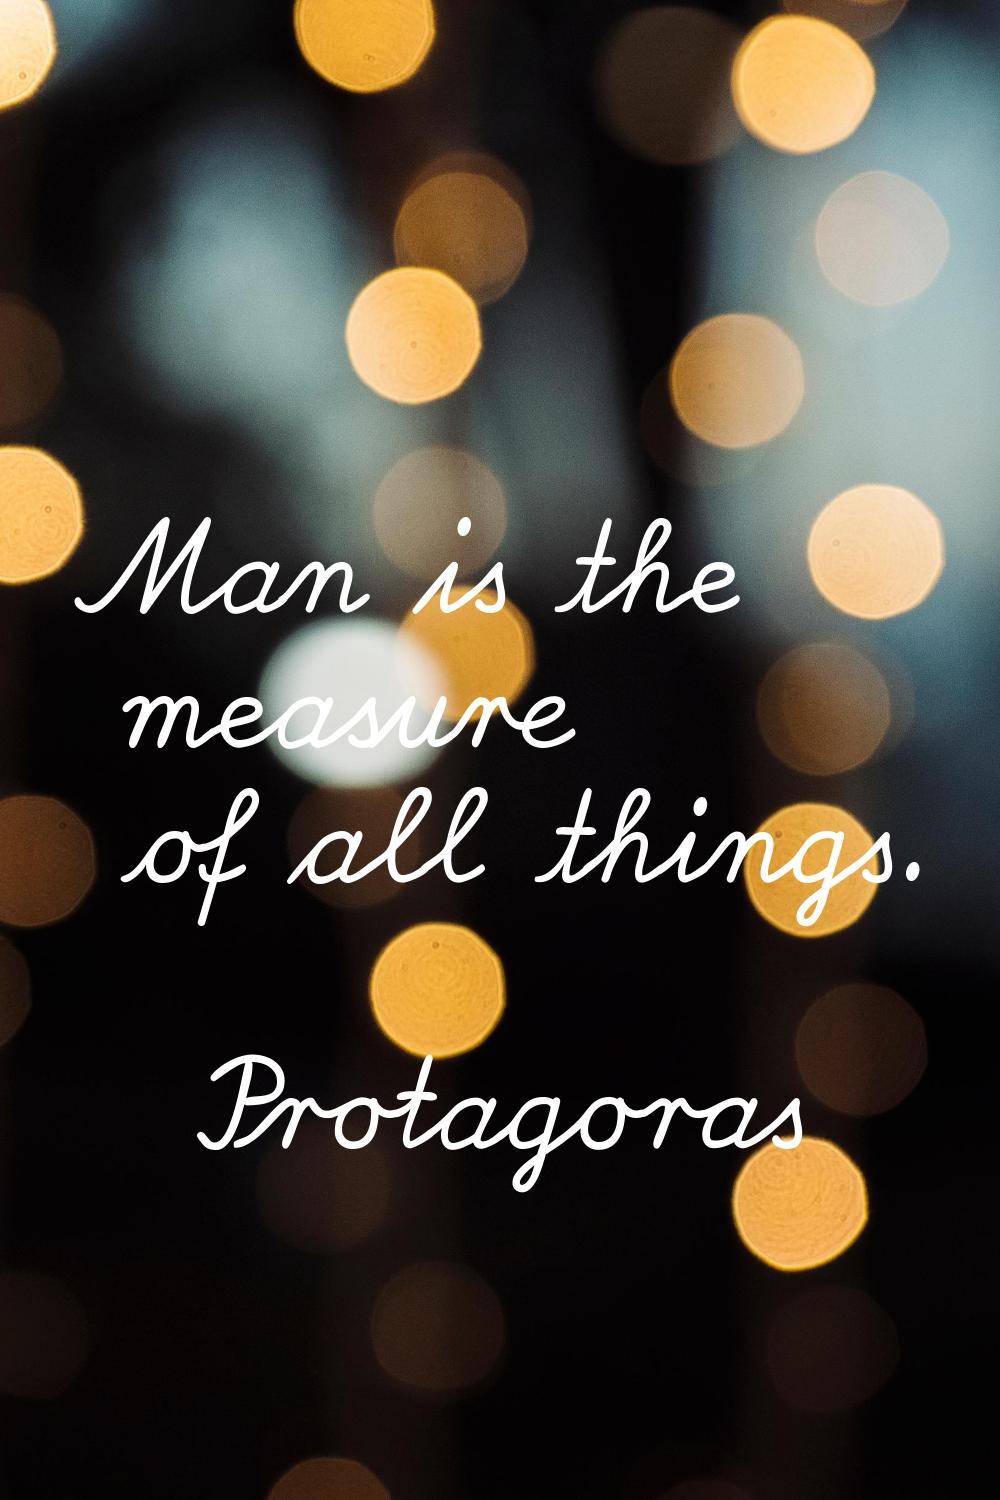 Man is the measure of all things.